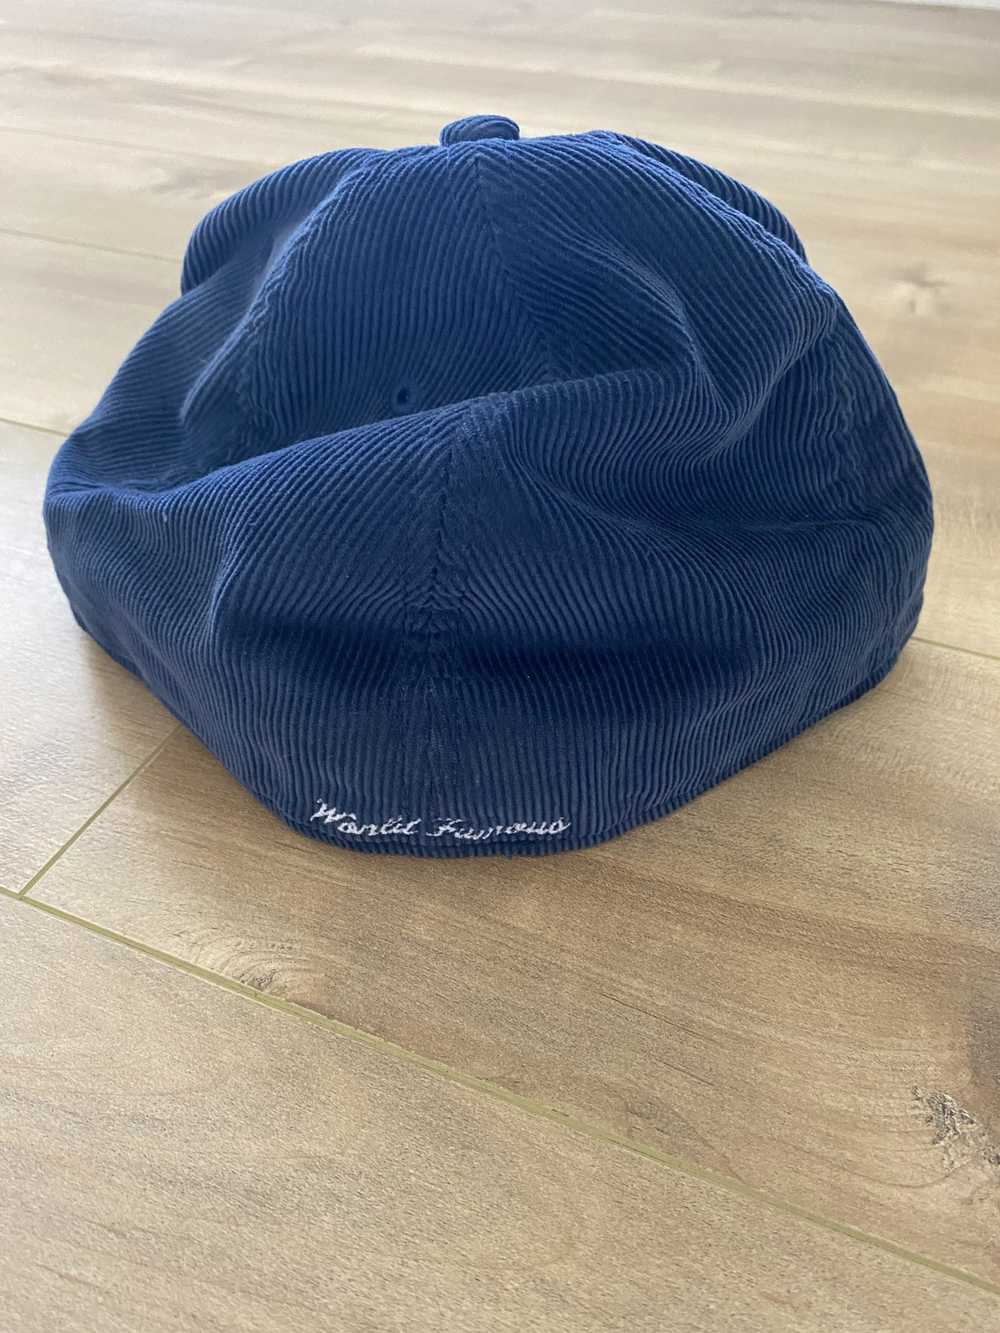 Supreme 7 3/4 Supreme World Famous Fitted Hat - image 2